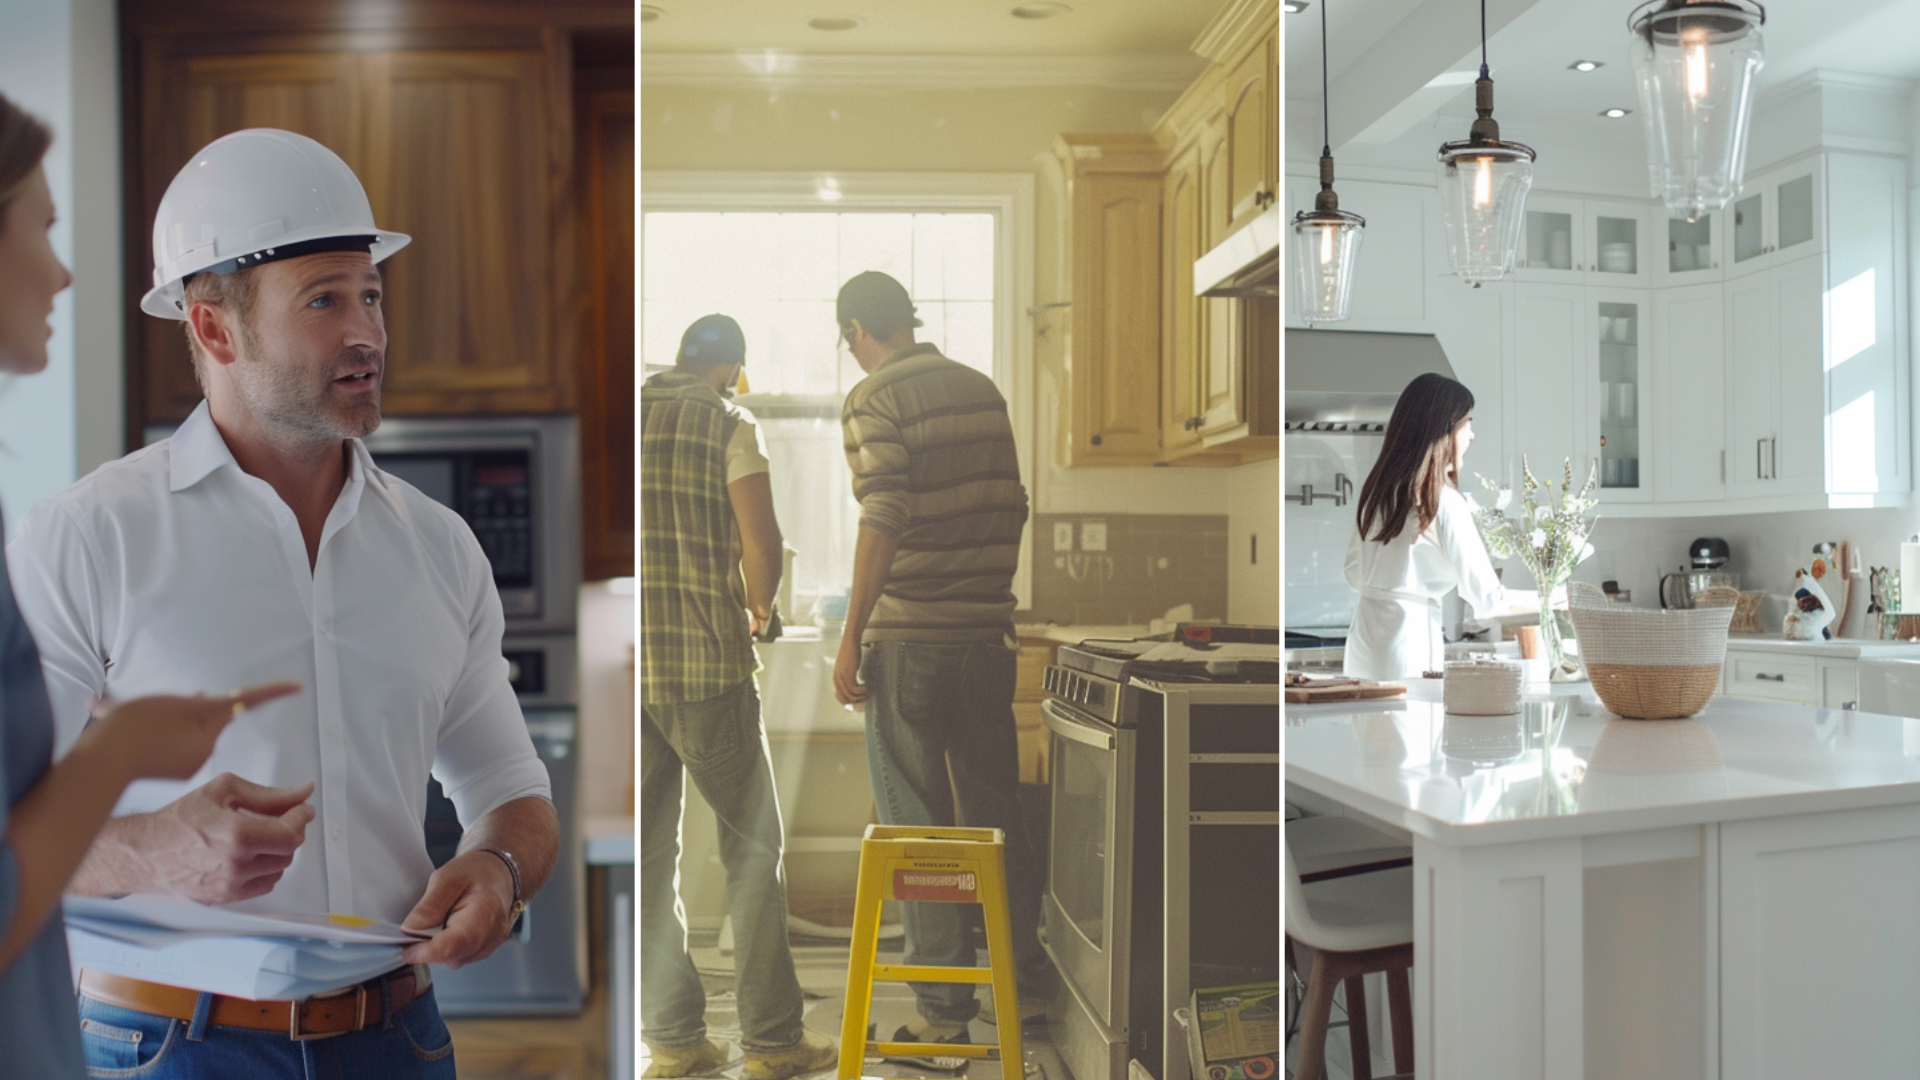 In the foreground, a man wearing a white hard hat is engaged in a discussion with a customer who doesn't have a hard hat. Create a picture of two workers working on kitchen remodeling, just small changes. Editorial Style photo, eye-level camera angle, modern style farmhouse, kitchen, the island as a focal point, wolf appliances, white tones, afternoon, cozy Mood, Contemporary Architecture, clean, modern kitchen with the cleaning lady in the foreround, wide shot.